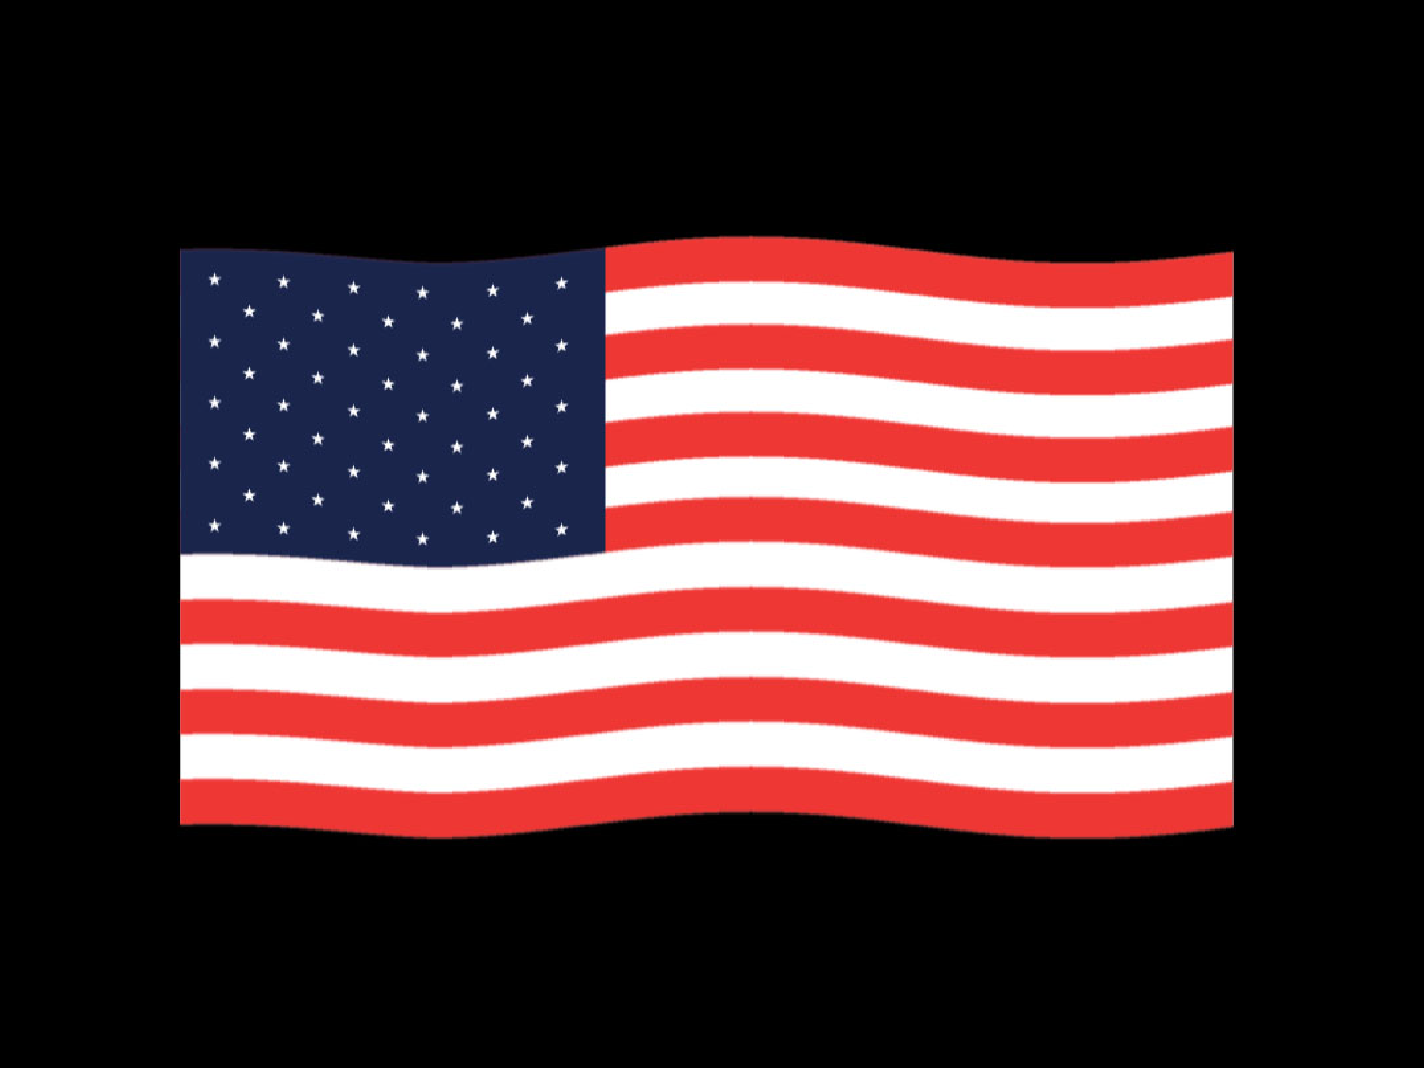 A rendering of the American Flag on a black background.